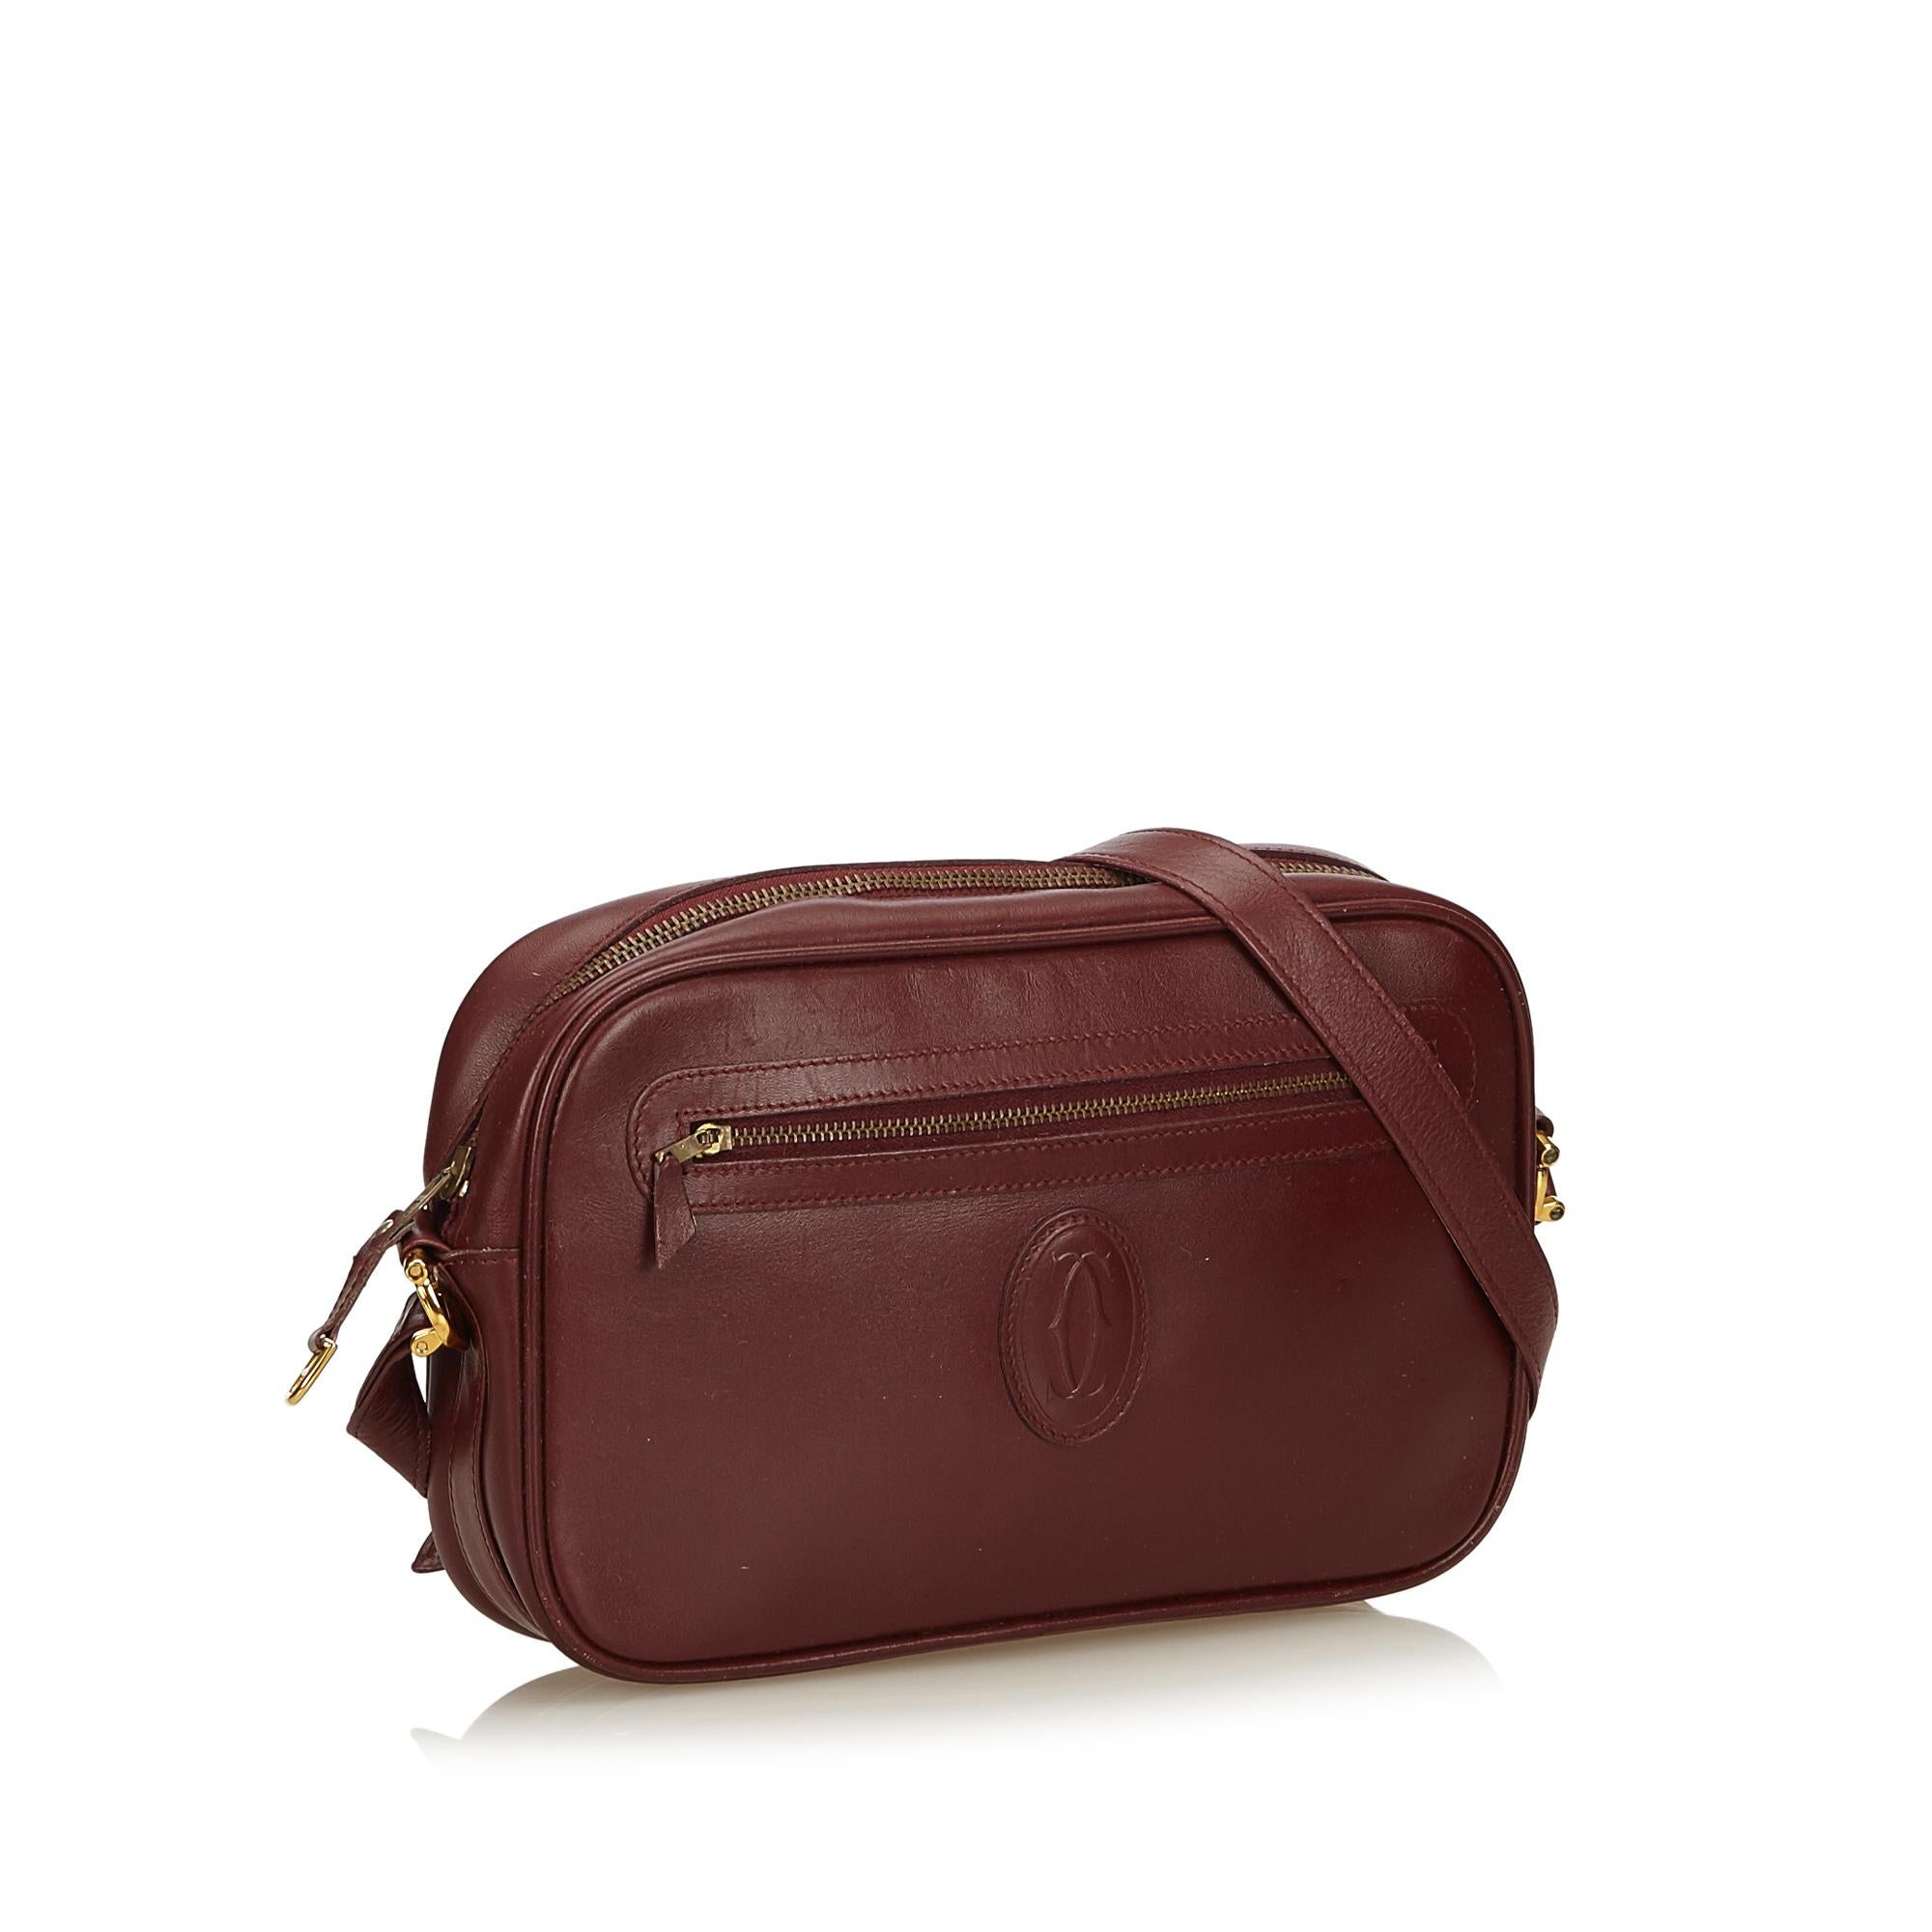 This crossbody bag features a leather body, flat strap, top zip closure, an exterior zip pocket, and an interior zip pocket.

It carries a B+ condition rating.

Dimensions: 
Length 17 cm
Width 27 cm
Depth 5 cm
Shoulder Drop 49 

Inclusions: No